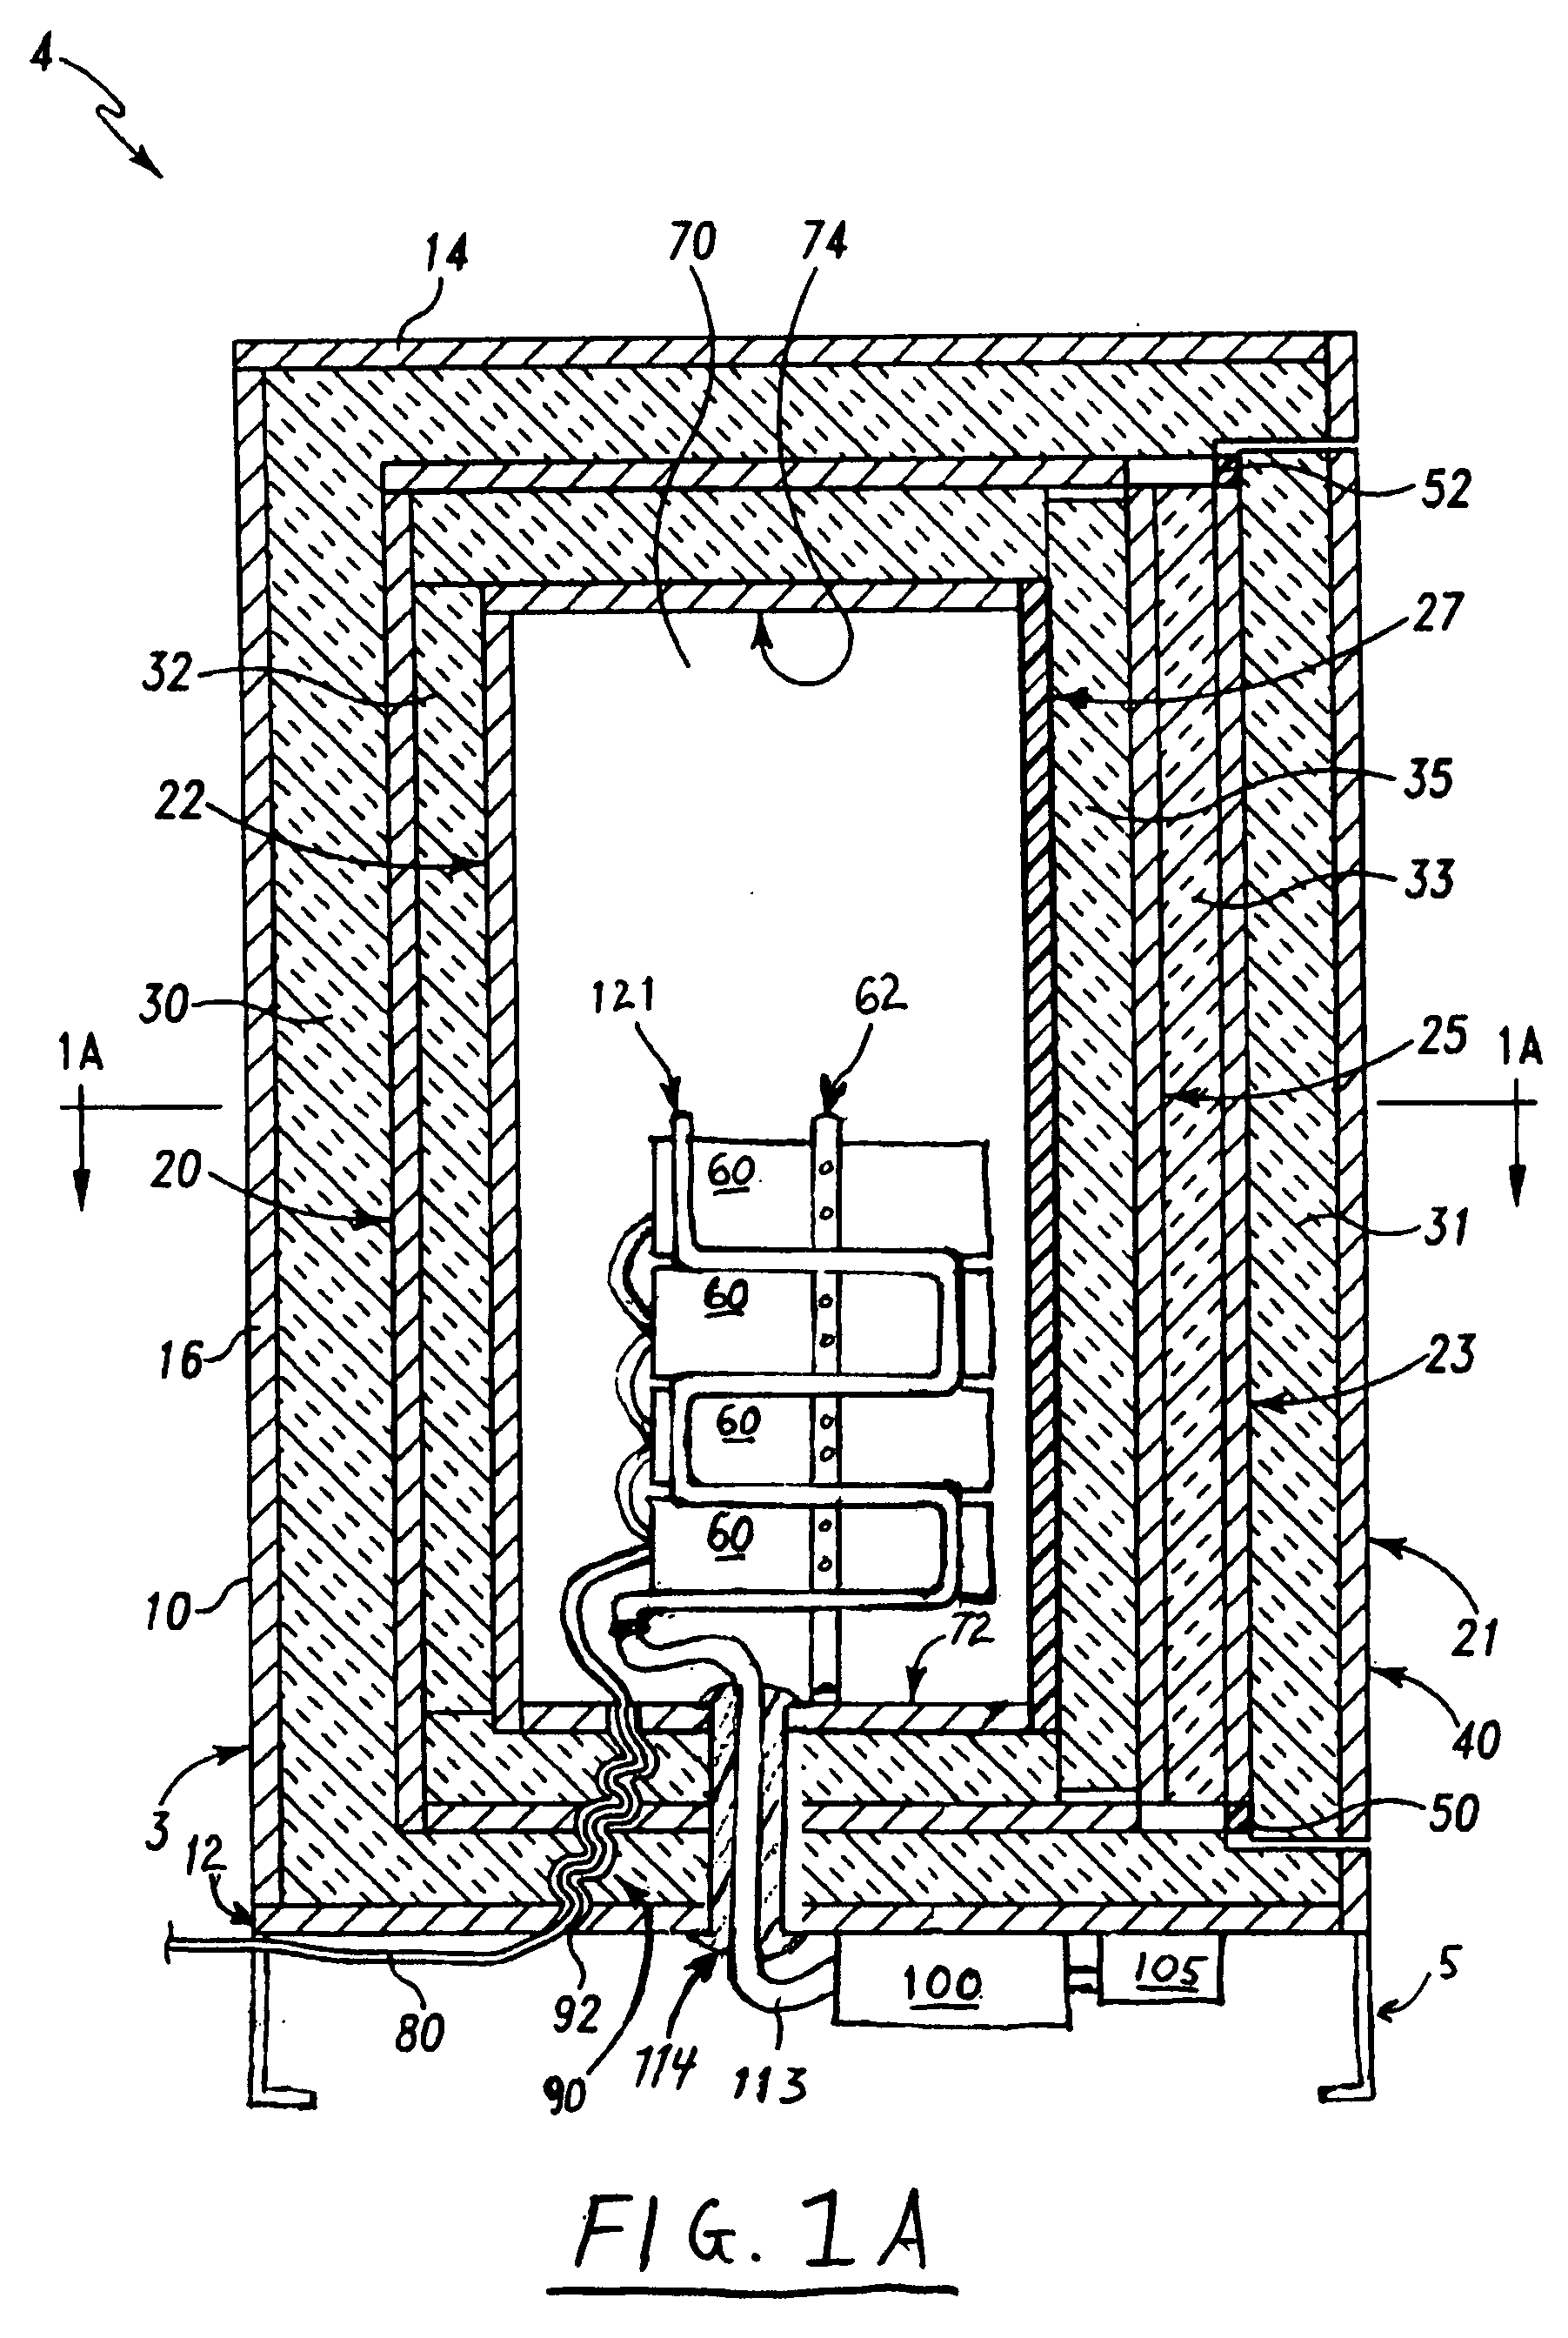 Fireproof data storage apparatus suitable for high ambient temperature environments and/or high wattage data storage devices